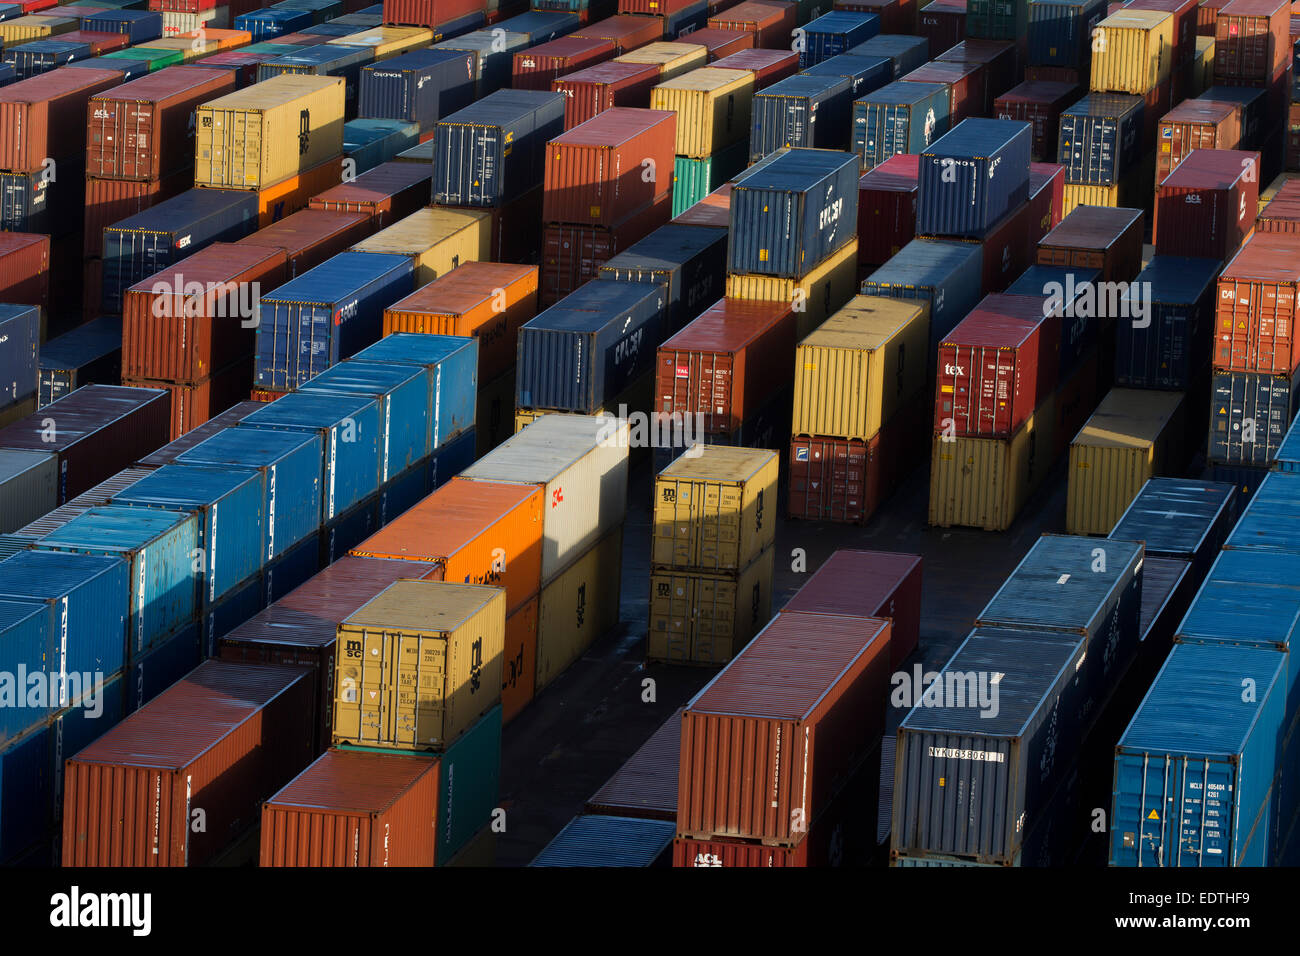 Cargo containers on the dock side at Seaforth Docks, Liverpool, England, UK. Stock Photo